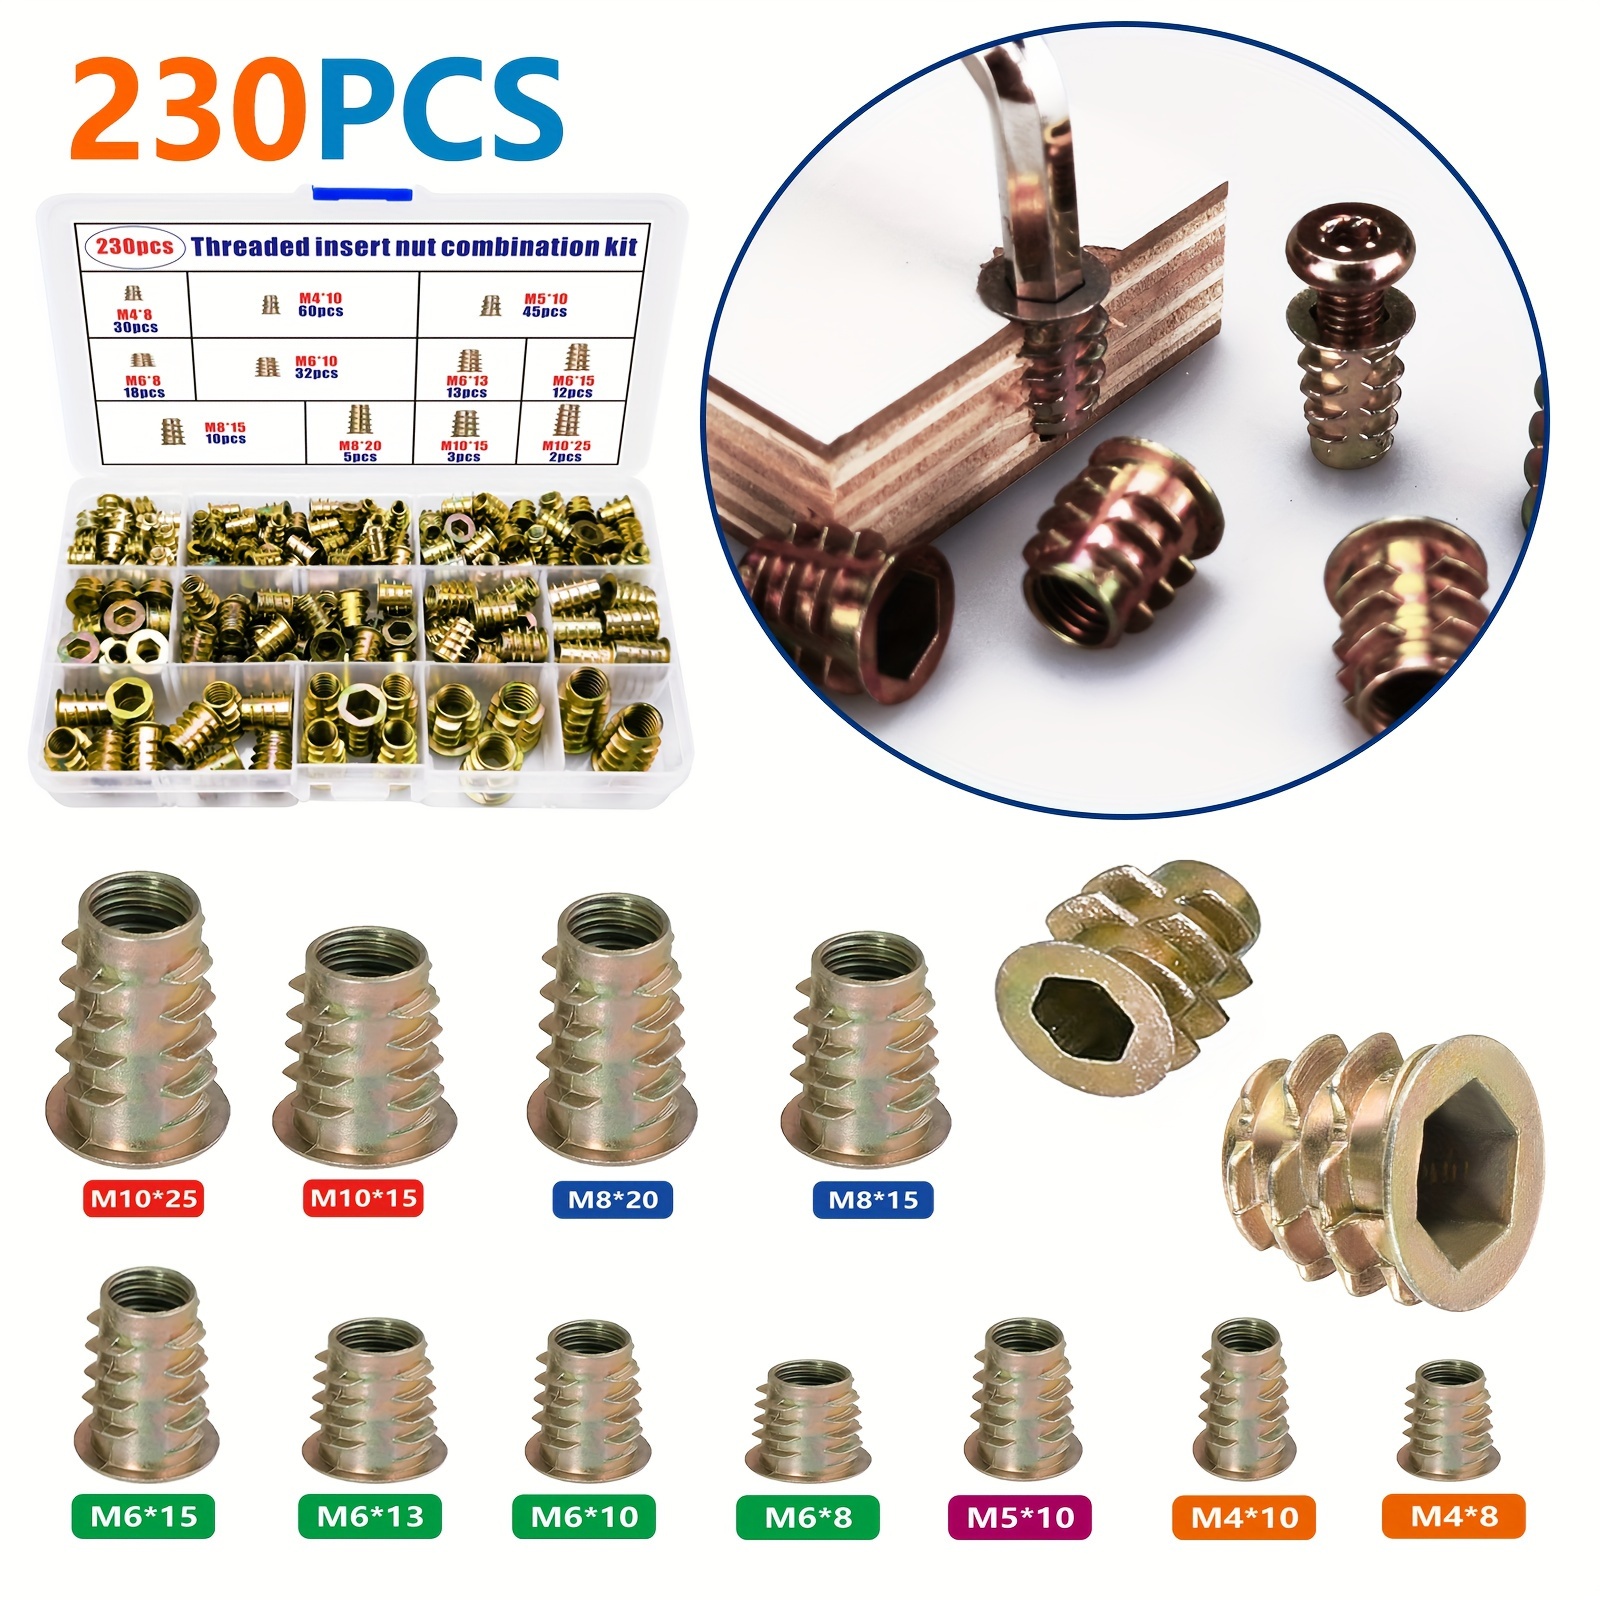 Can Threaded Inserts Be Used on All Types of Wood? - Popular